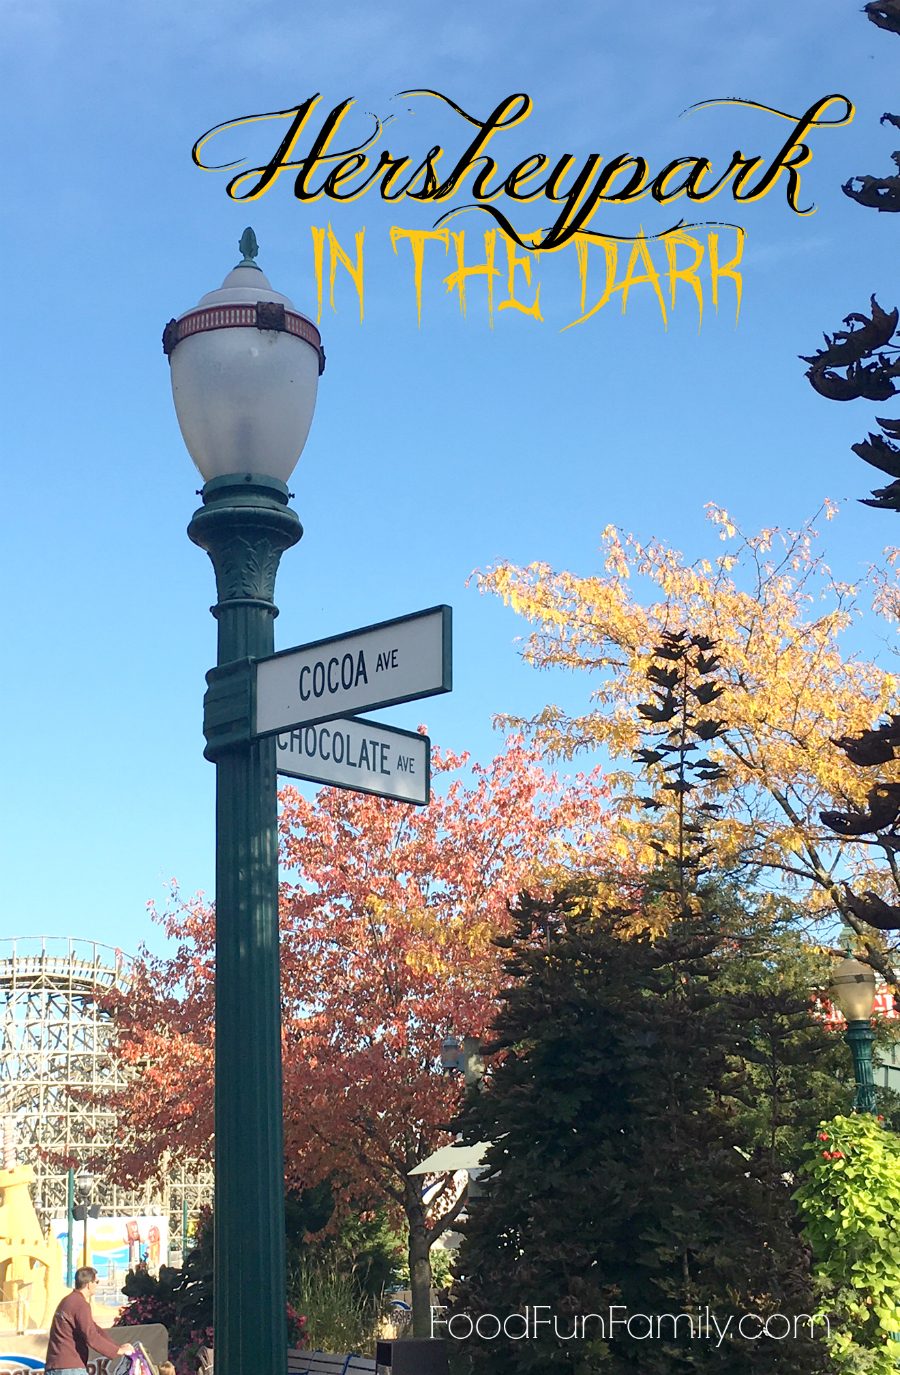 Hersheypark in the Dark - check out everything you can do and see during the Halloween season in Hershey!